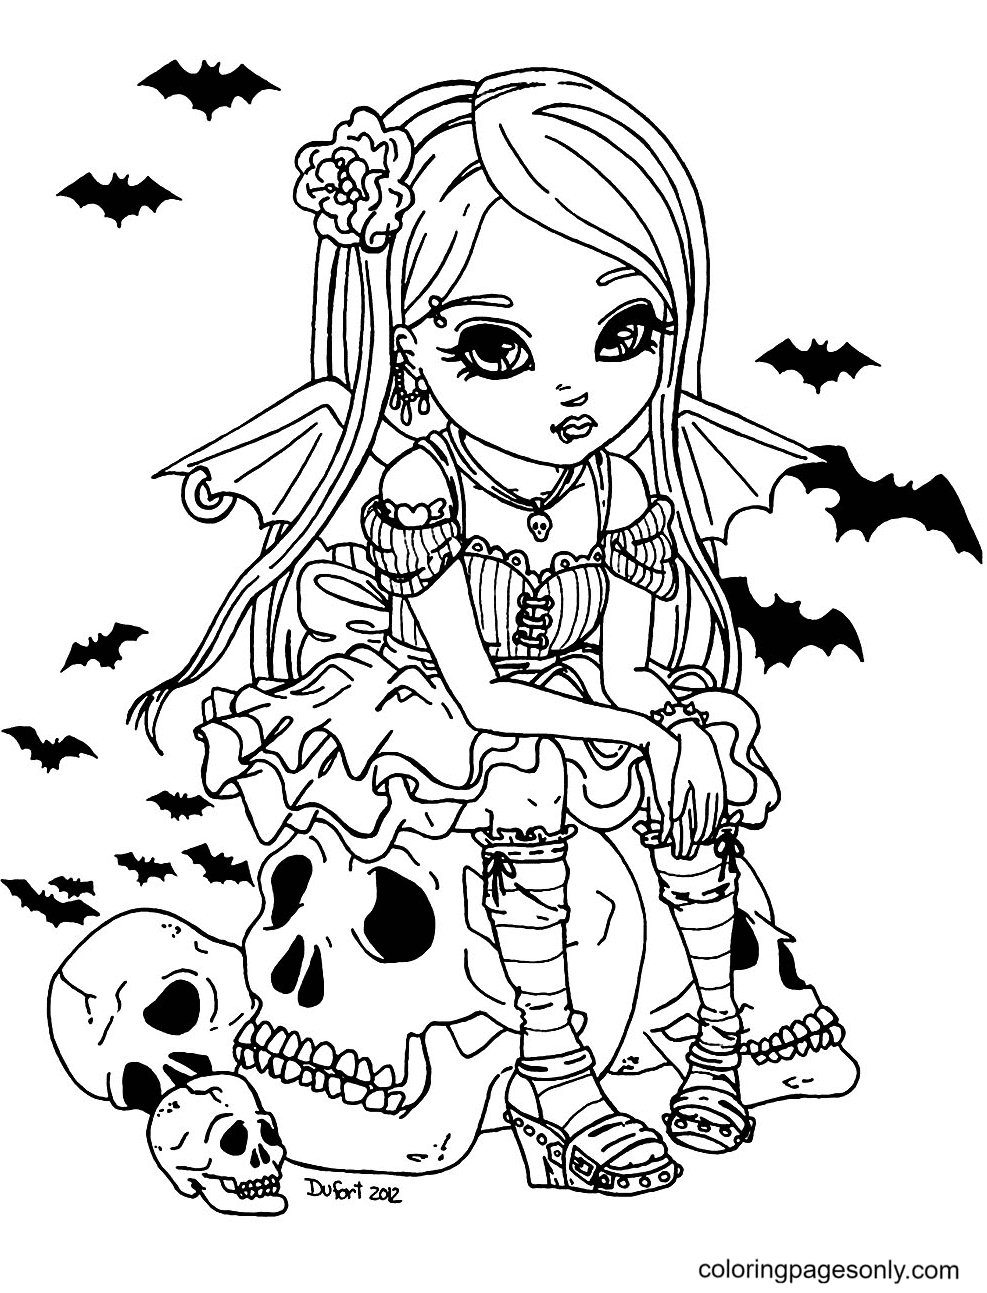 Vampire coloring pages printable for free download